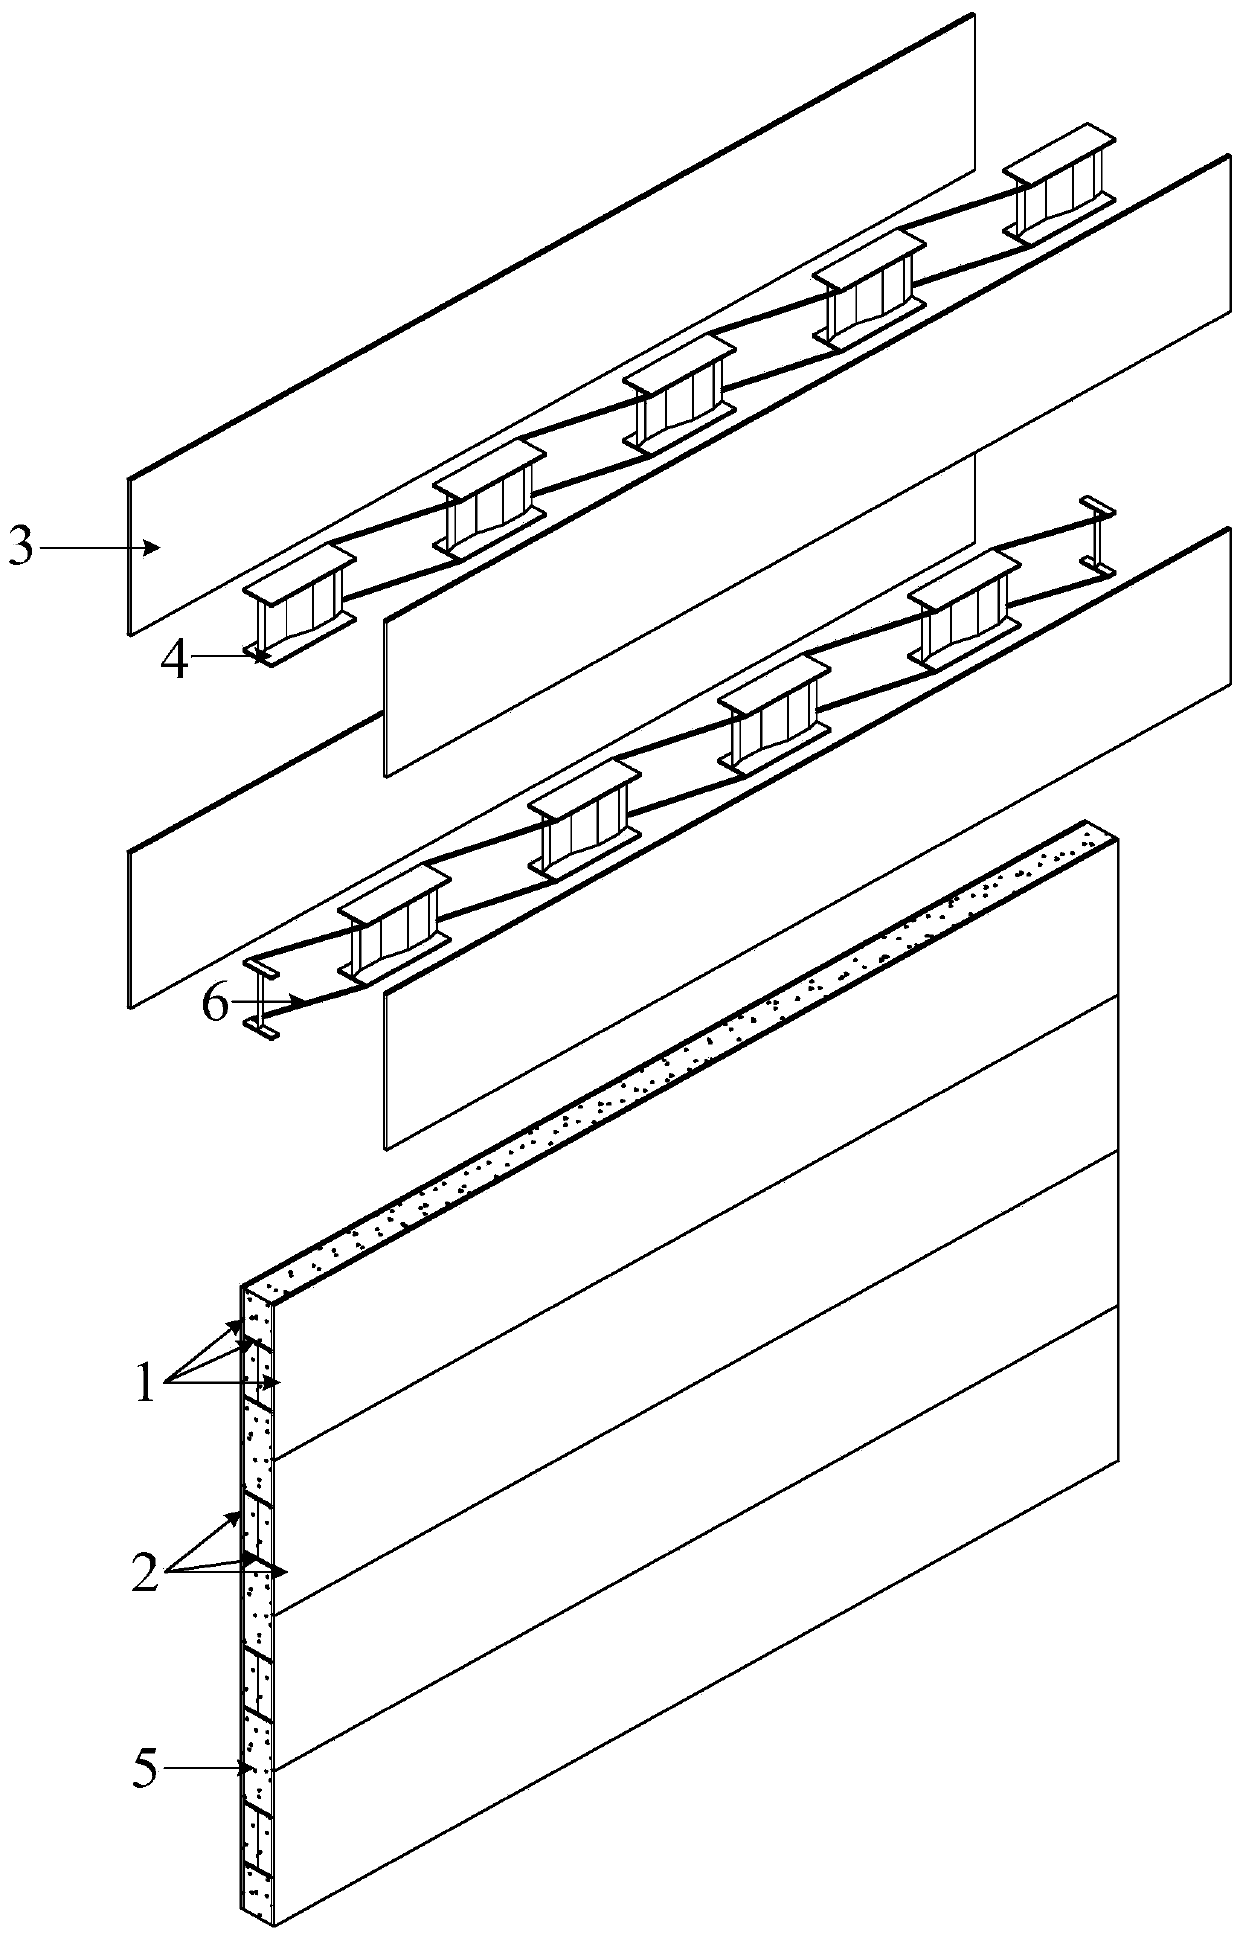 Double-layer steel plate composite shear wall with corrugated web I-shaped steel components transversely arranged in staggered mode